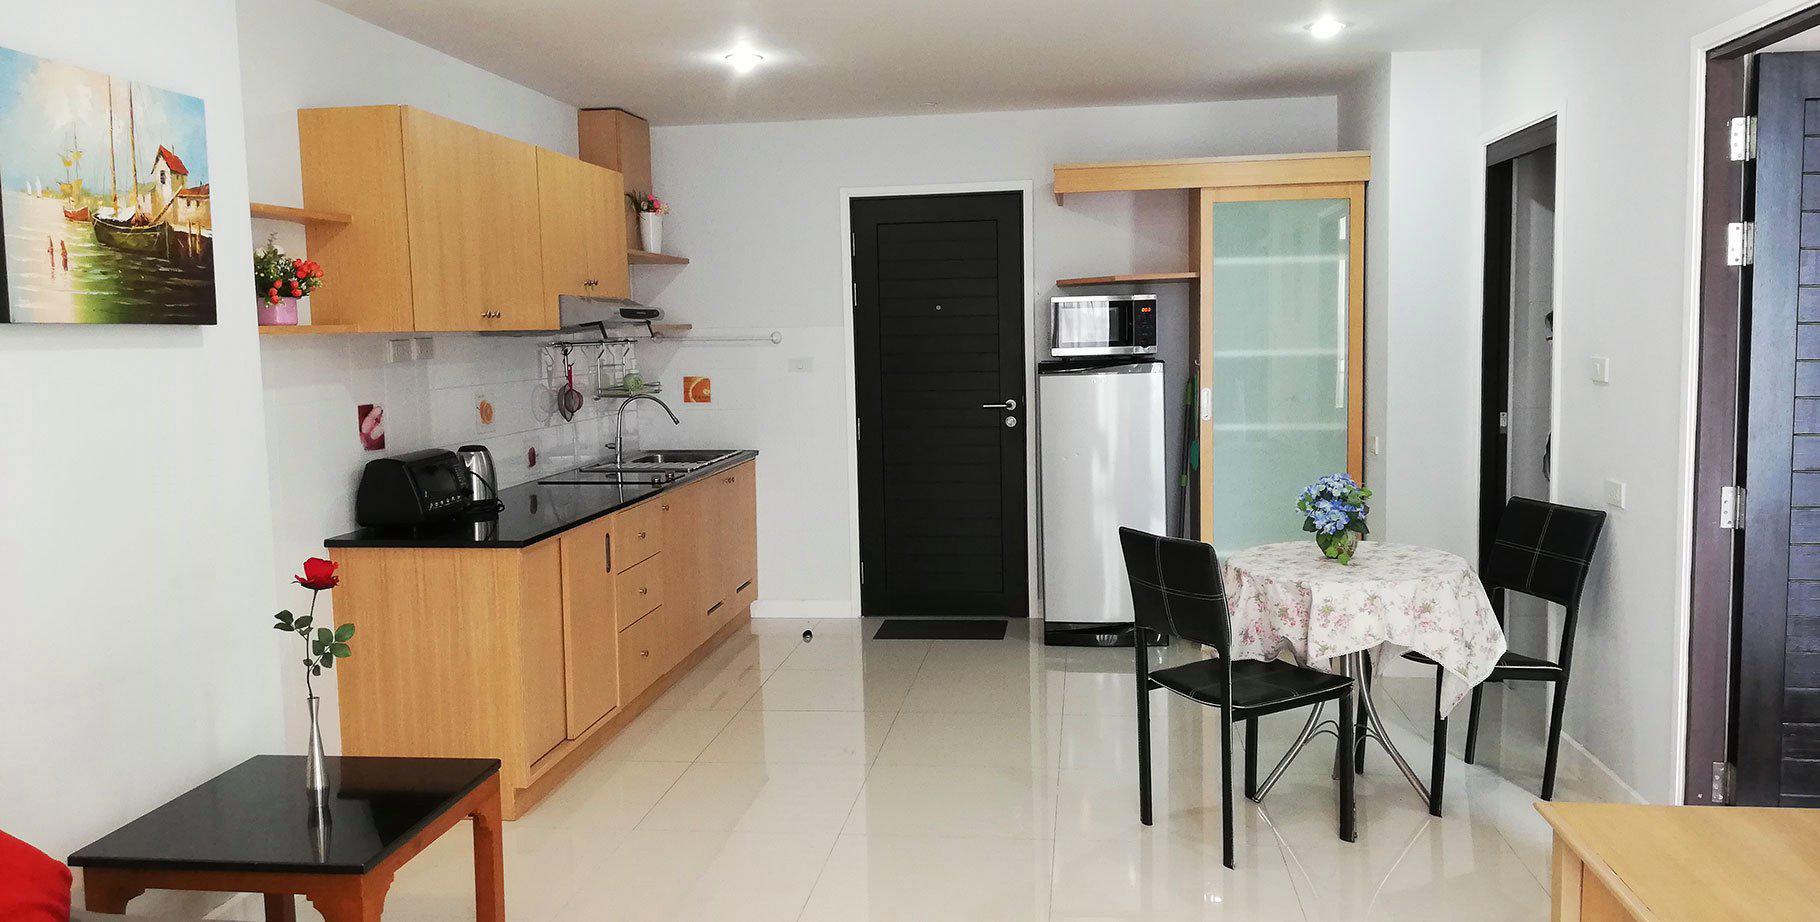 Furnished Condo near Cmu 7th floor.Ready to move in.